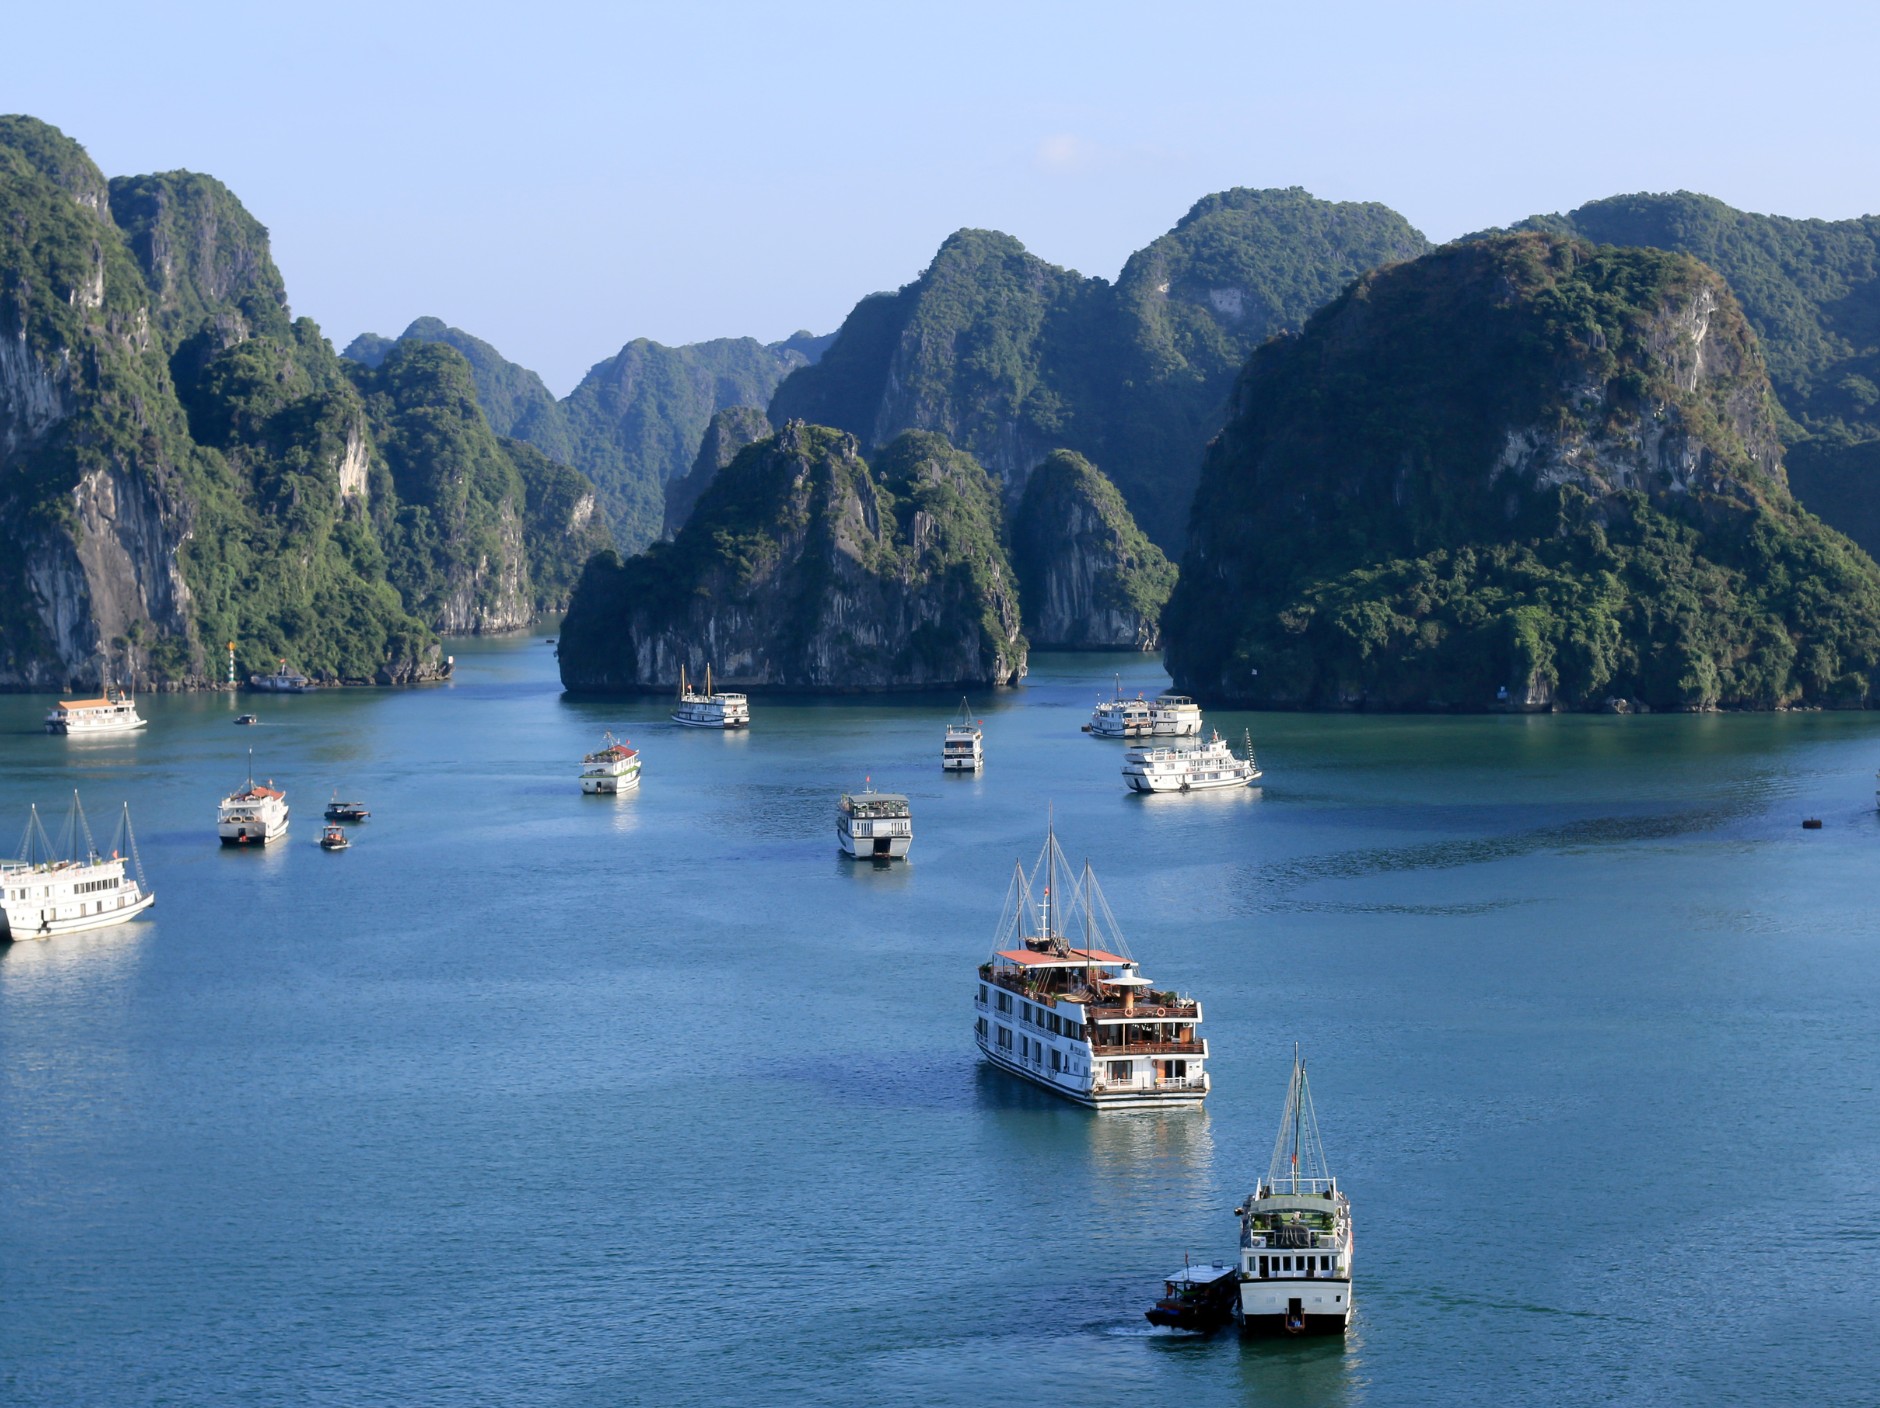 Embark on a journey like no other as you sail through the magnificent landscapes of Ha Long Bay